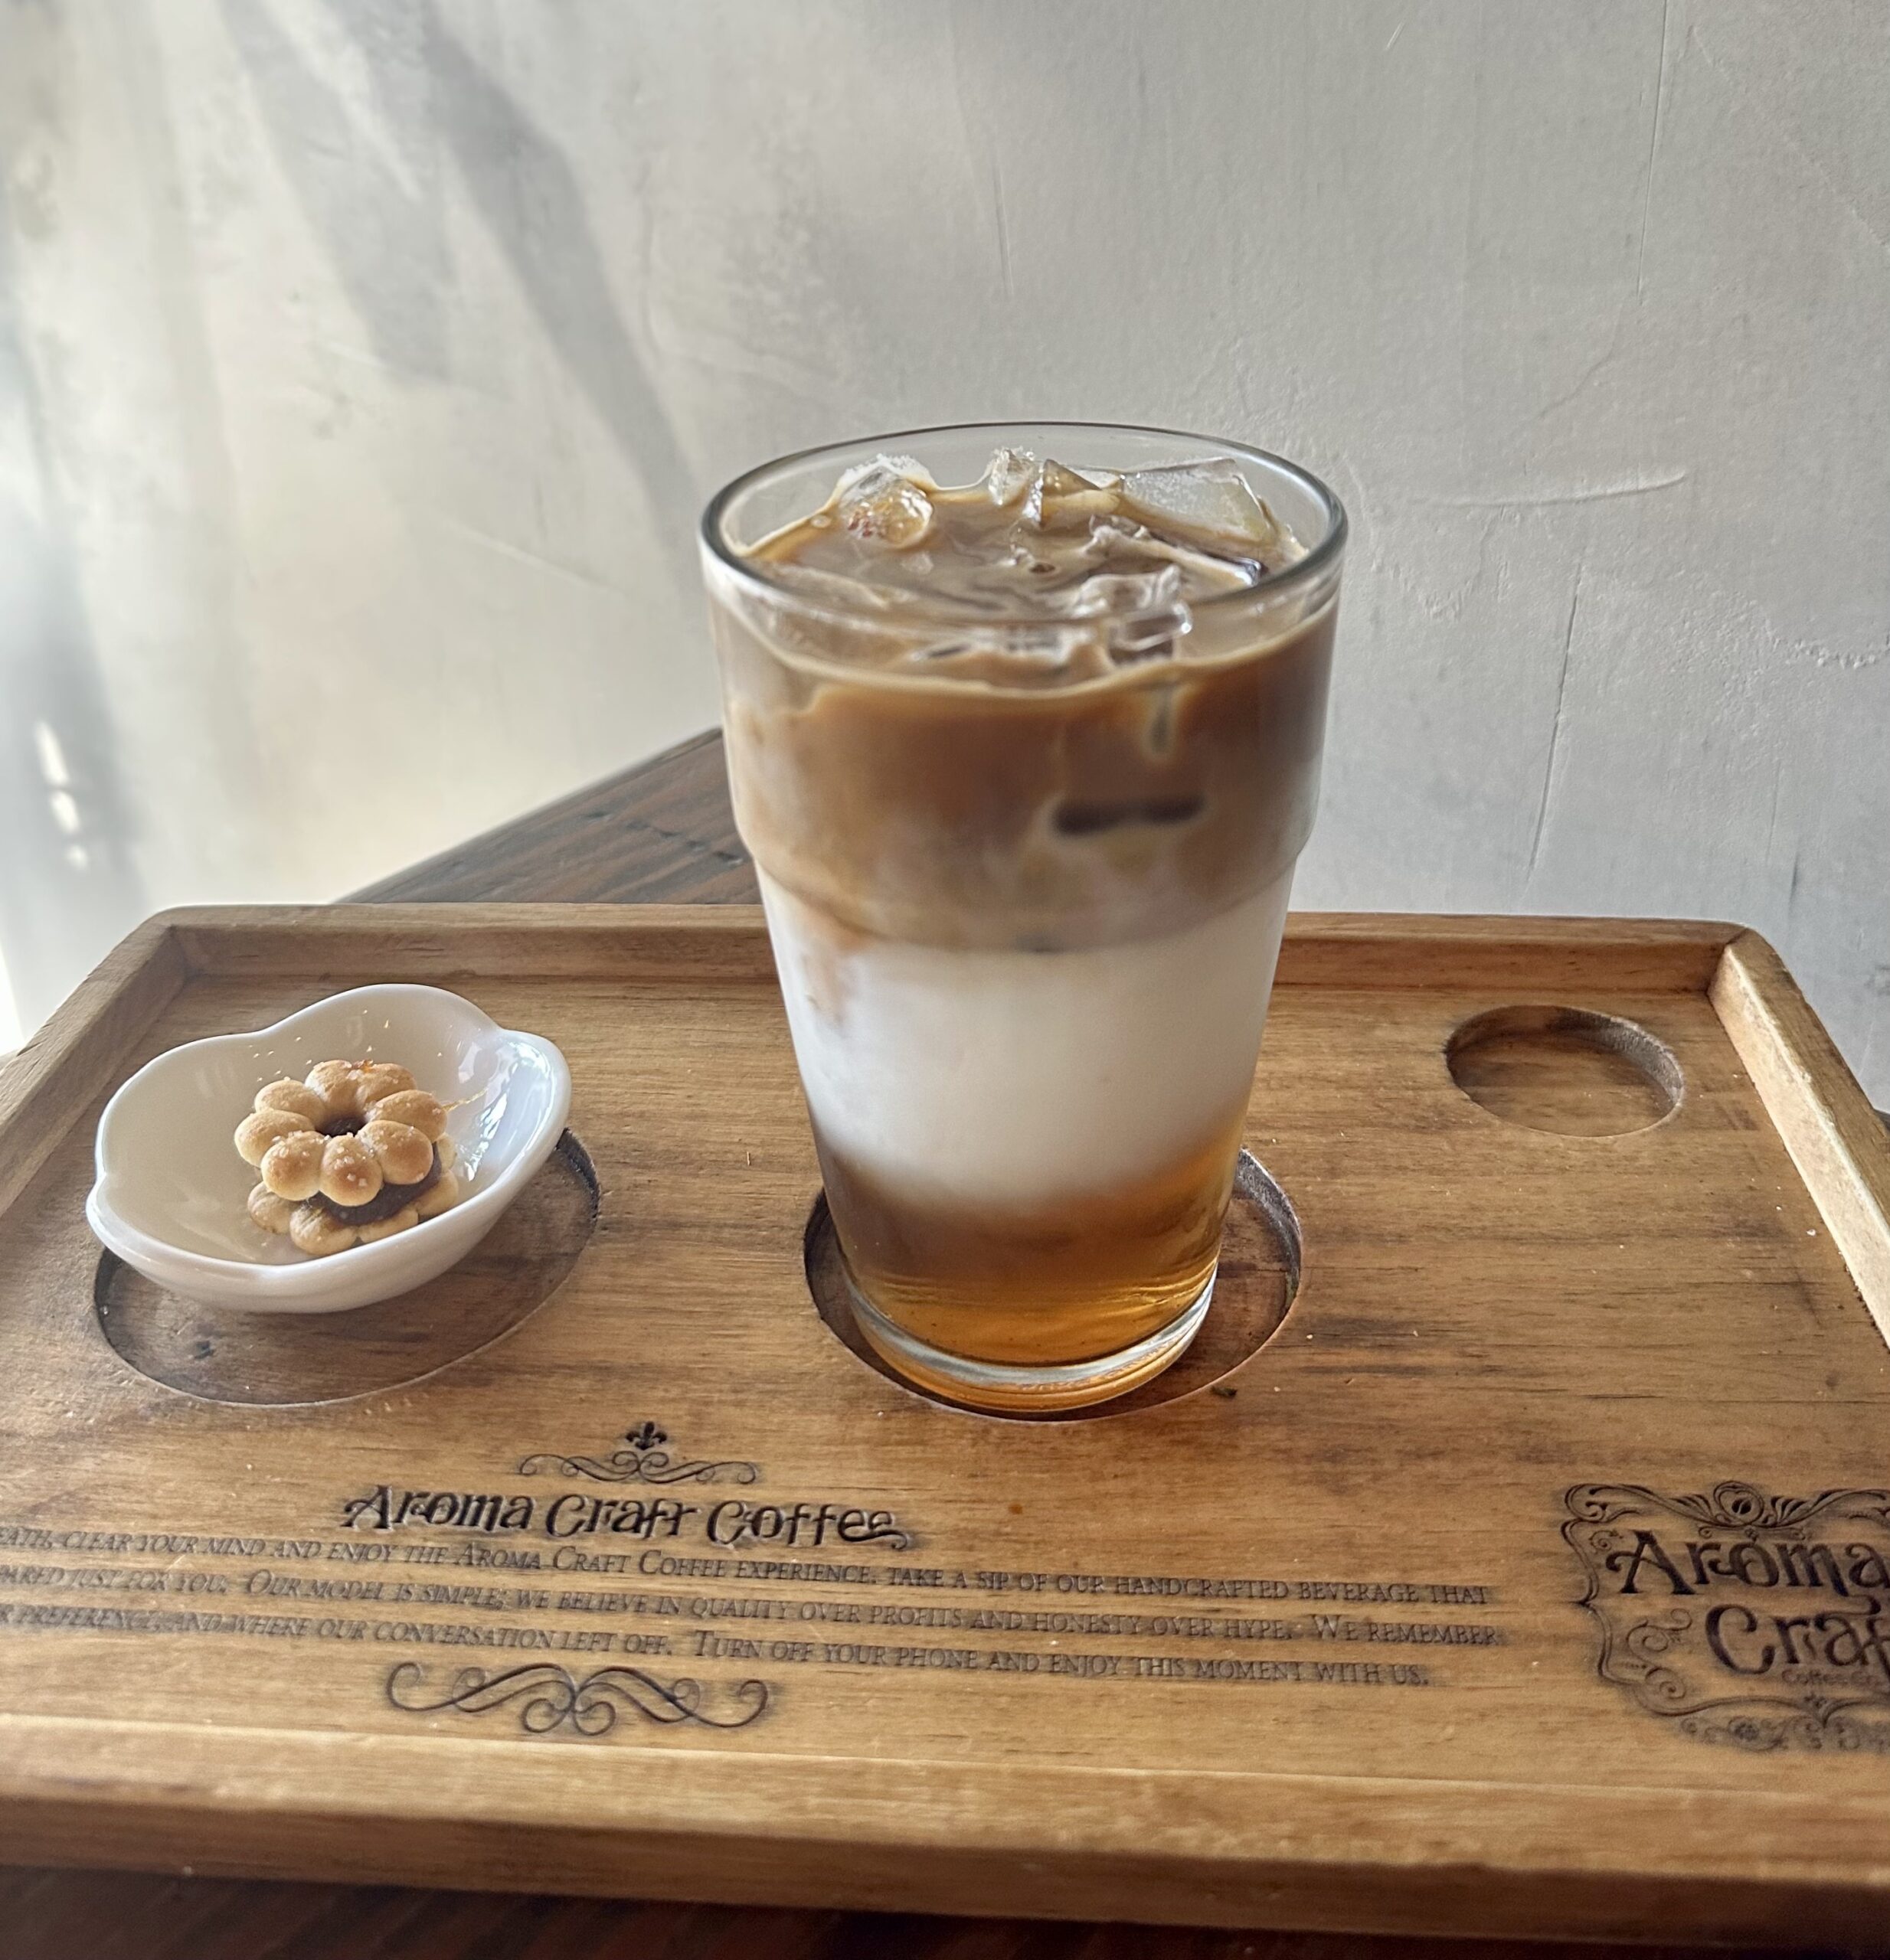 Aroma Craft Coffee  Your Favorite Local Coffee Shop